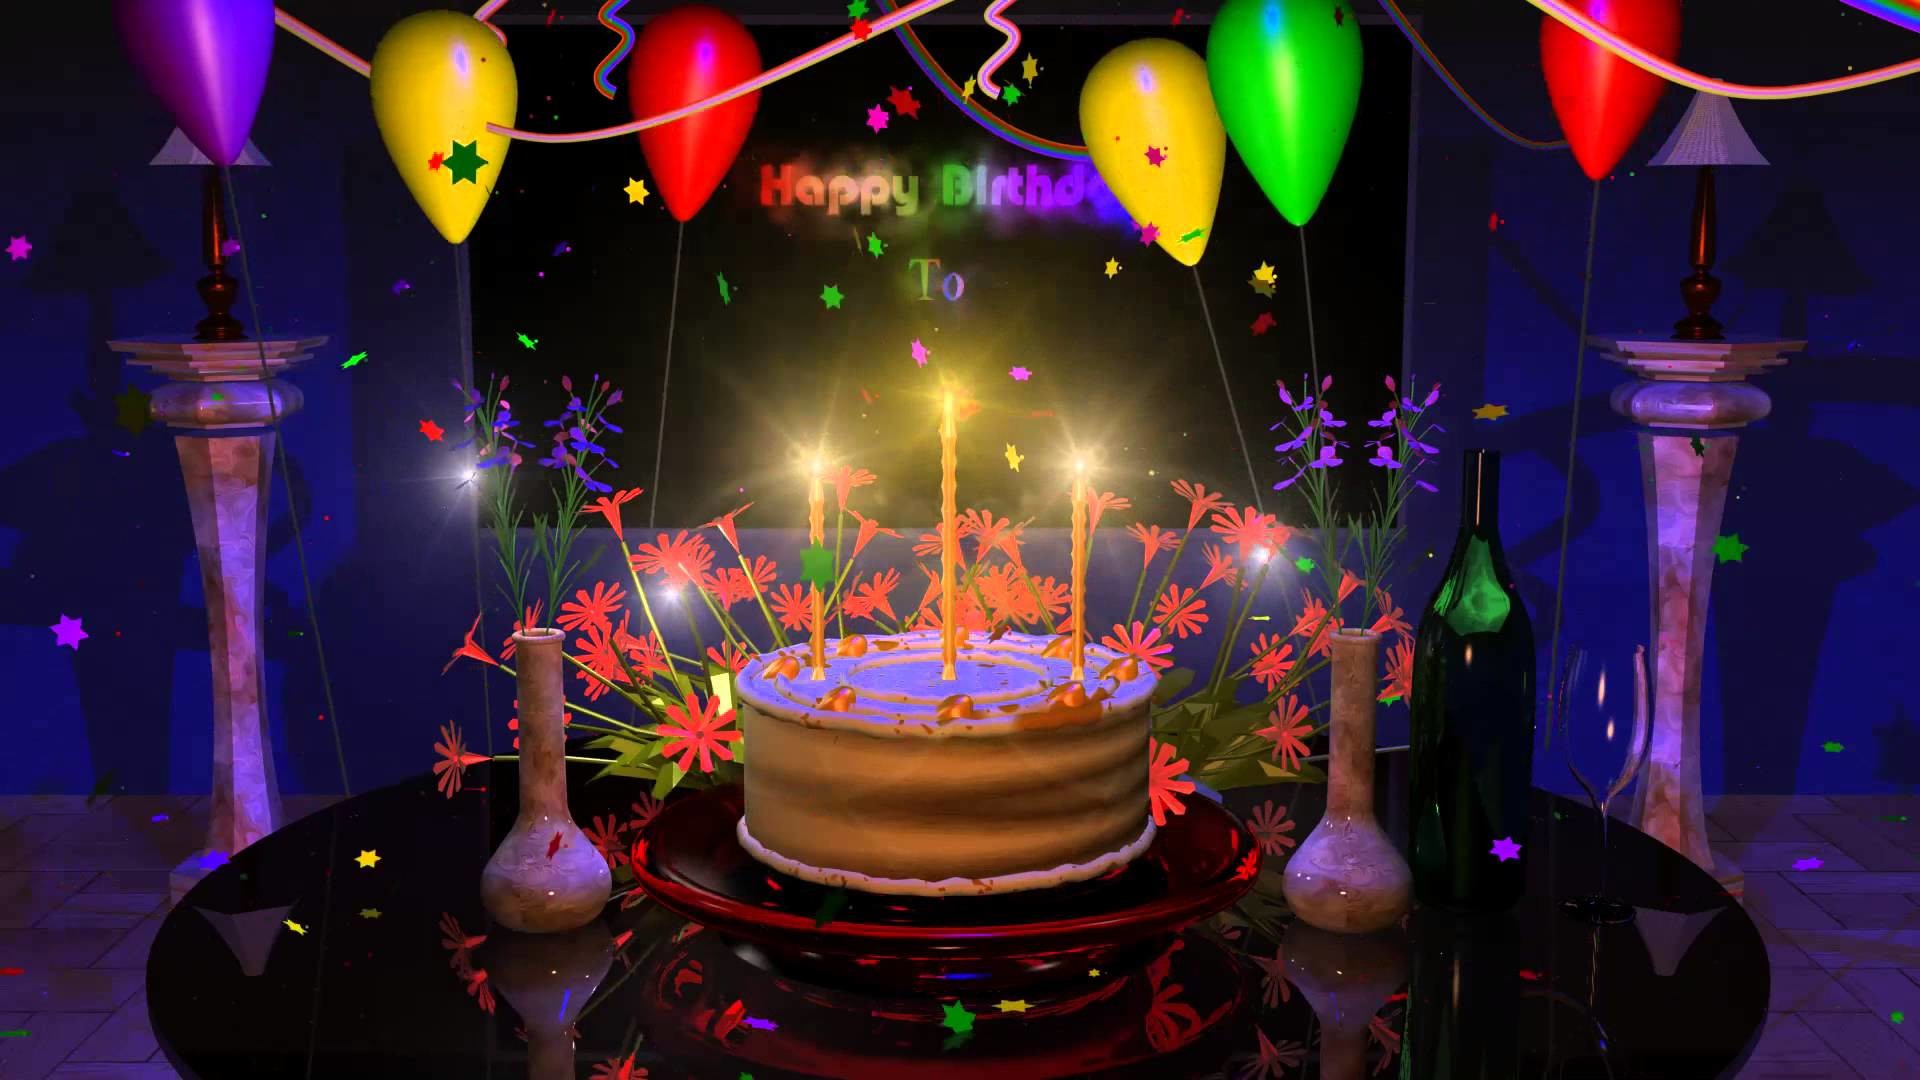 1920x1080 Beautiful Happy Birthday Party image HD Wallpapers